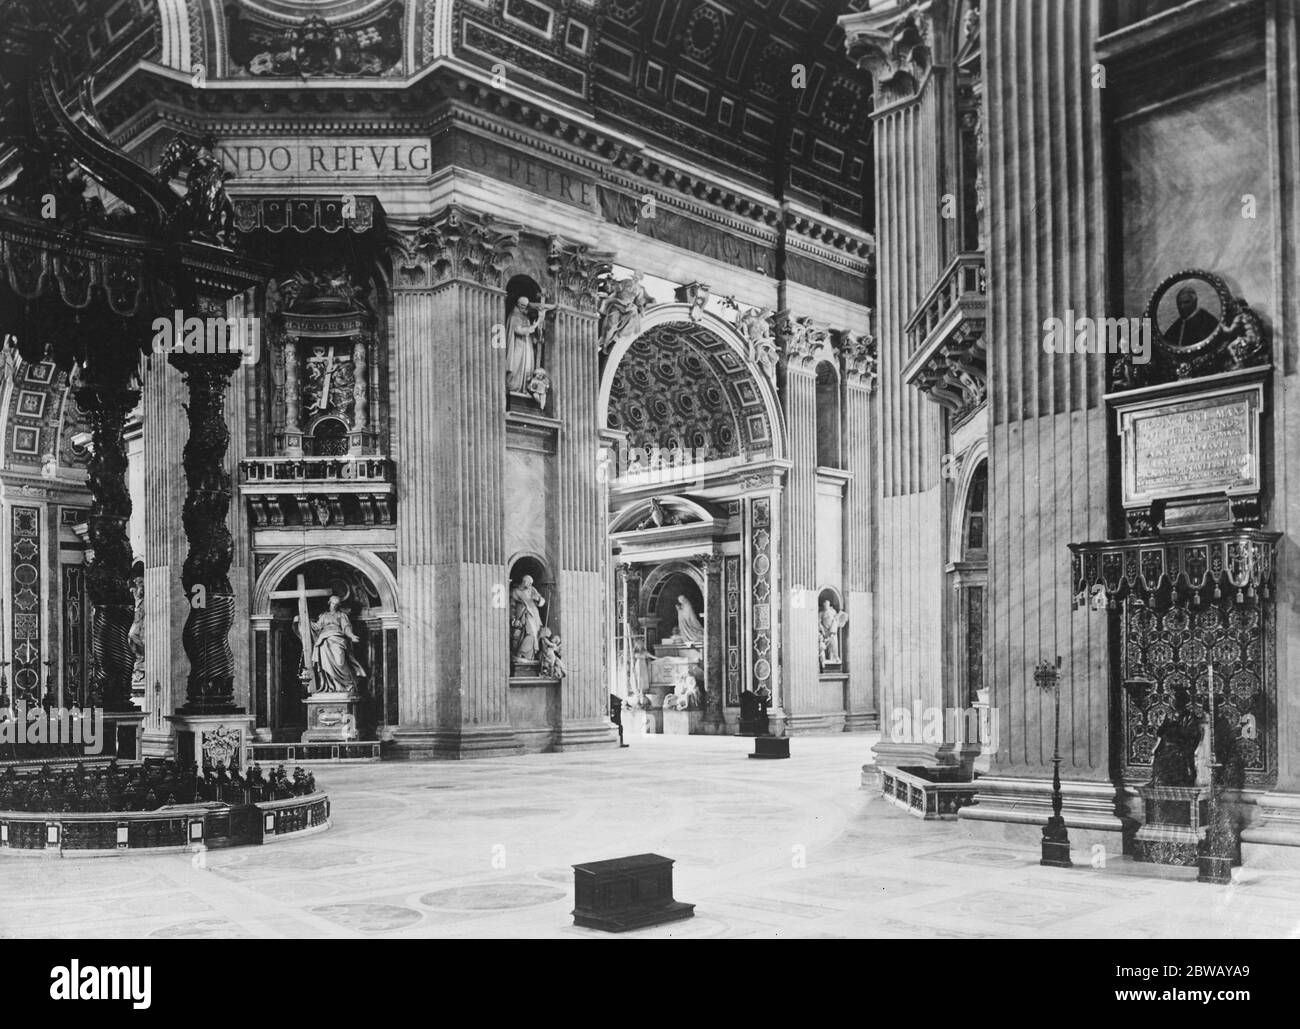 St Peter 's Rome An interior view of the Memorial to Pope Clement XIII and on the right Pope Pius IX 25 January 1922 Stock Photo